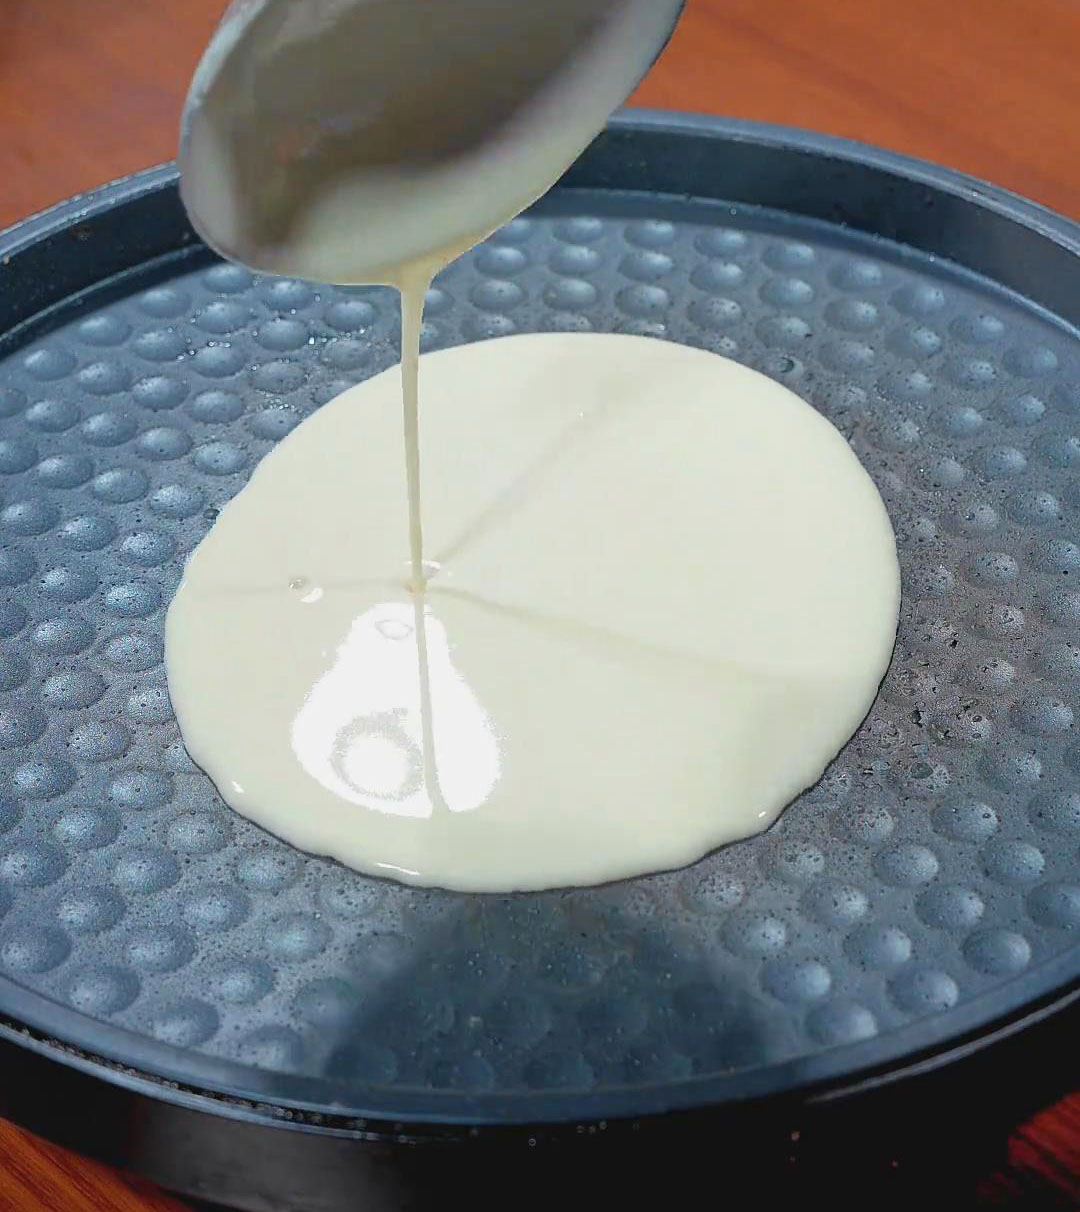 Pour the batter into a heated non stick pan